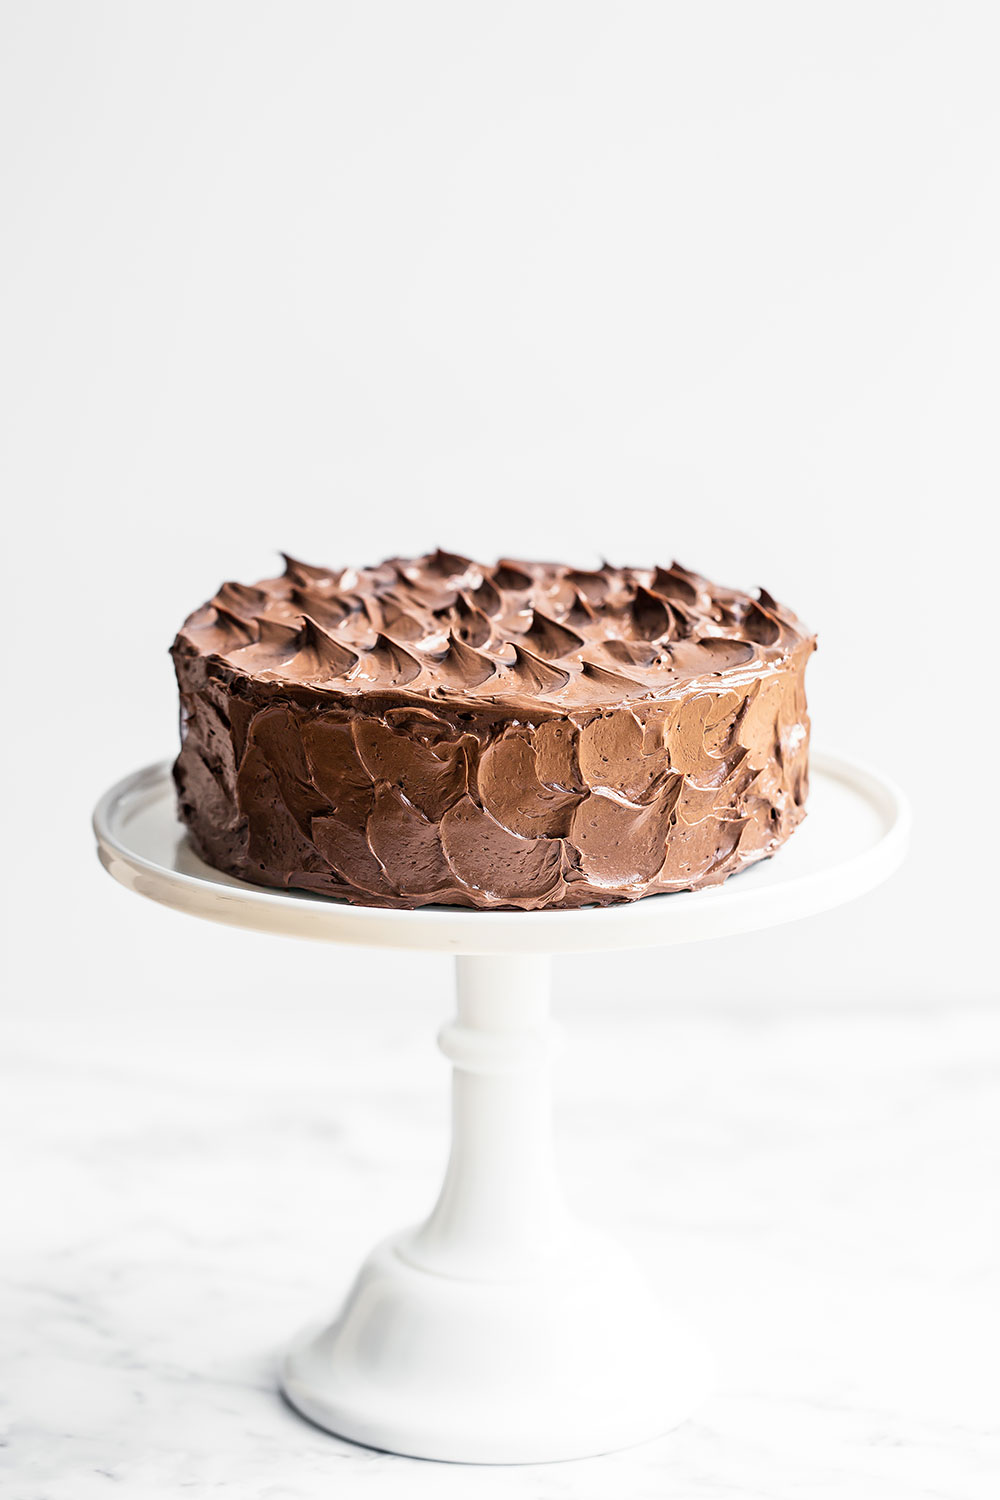 Best Chocolate Cake with Swiss Meringue Buttercream on a cake stand